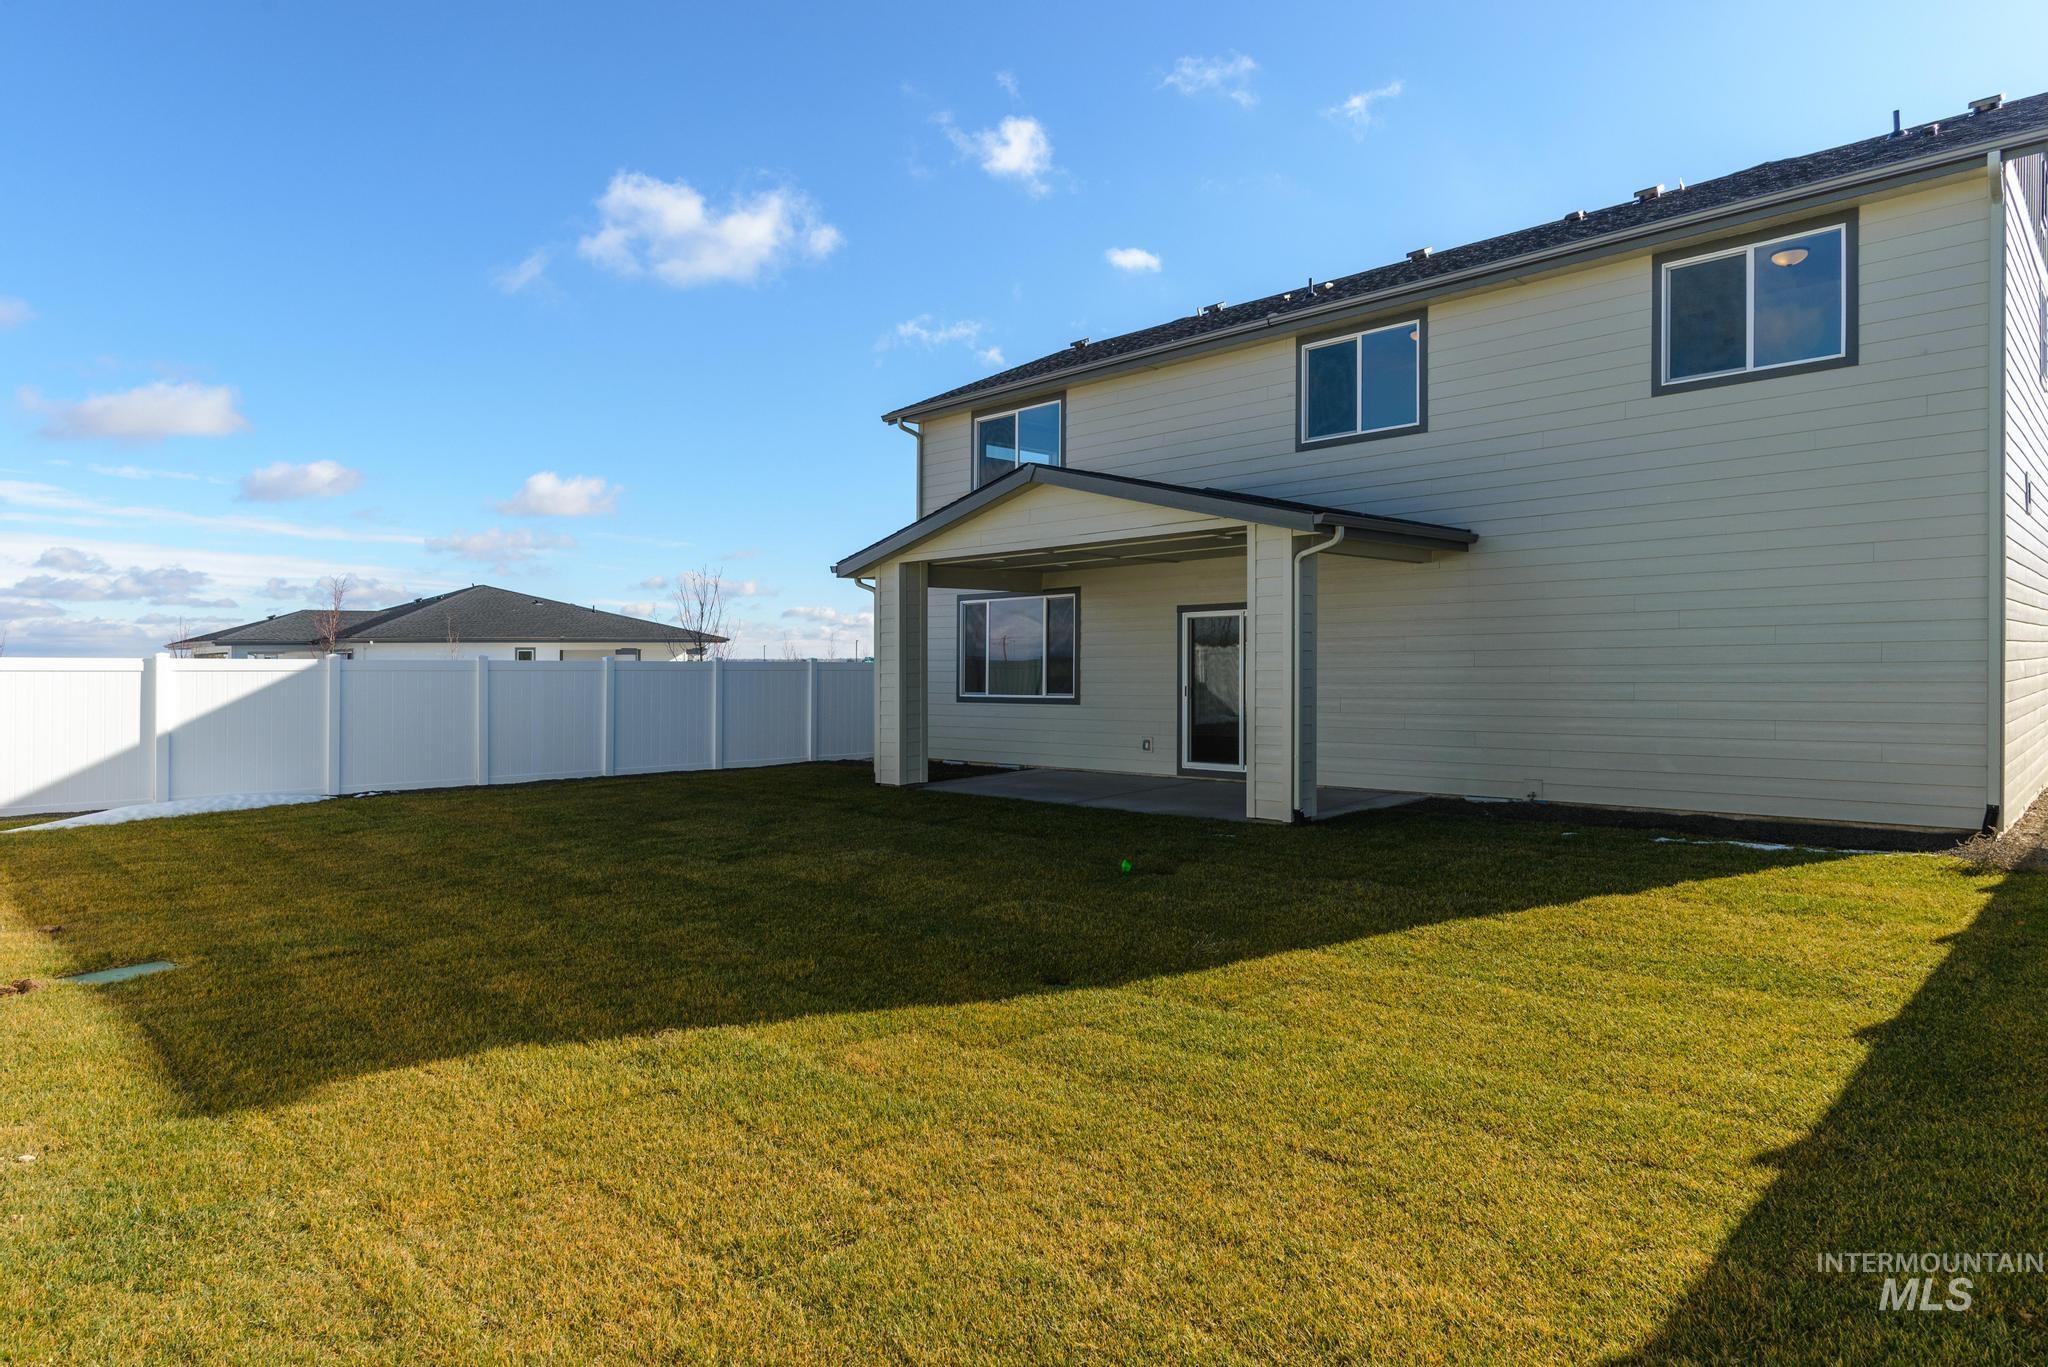 2650 Laidlaw Dr, Emmett, Idaho 83617, 4 Bedrooms, 2.5 Bathrooms, Residential For Sale, Price $524,995,MLS 98908646